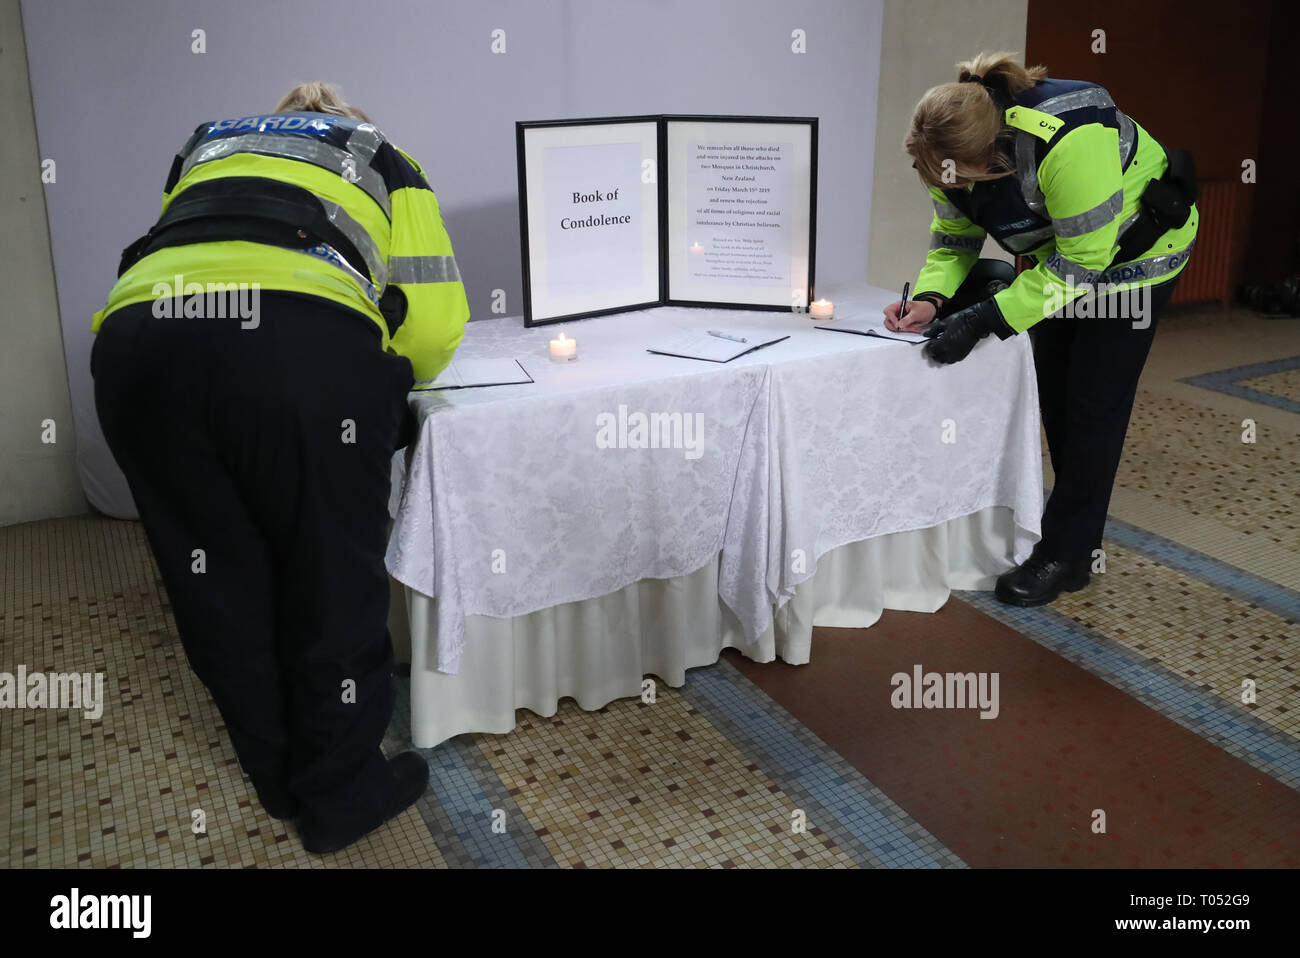 A couple of Gardais sign a book of condolence before a memorial service for the victims of the New Zealand Mosque attacks at St Marys Pro Cathederal in Dublin. Stock Photo